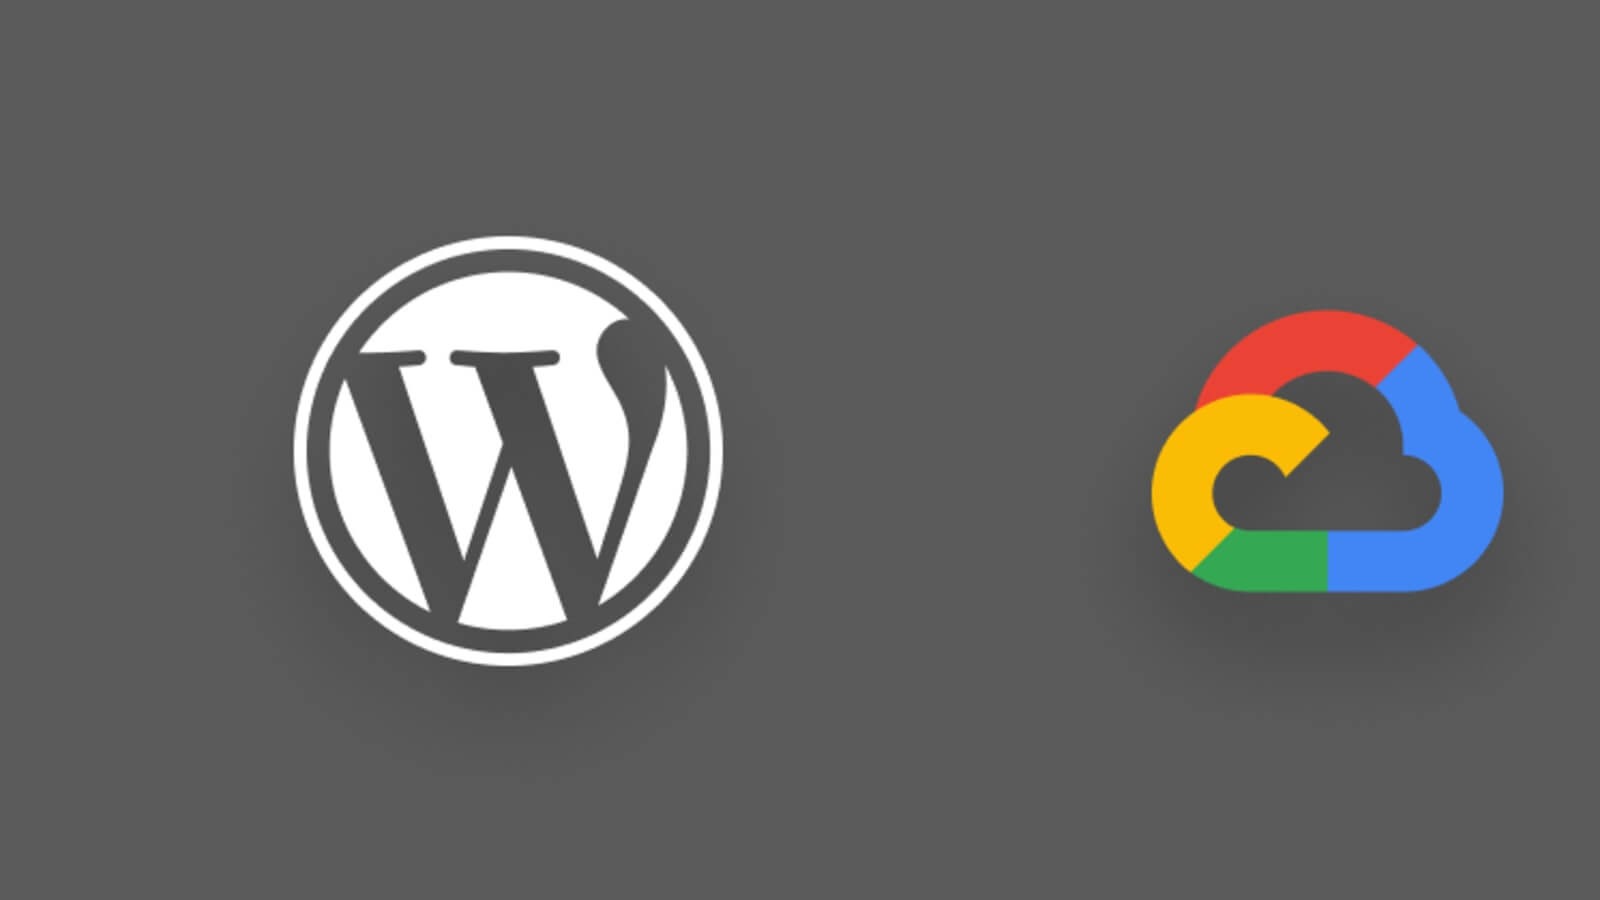 Step-by-step guide to Install WordPress on Google Cloud